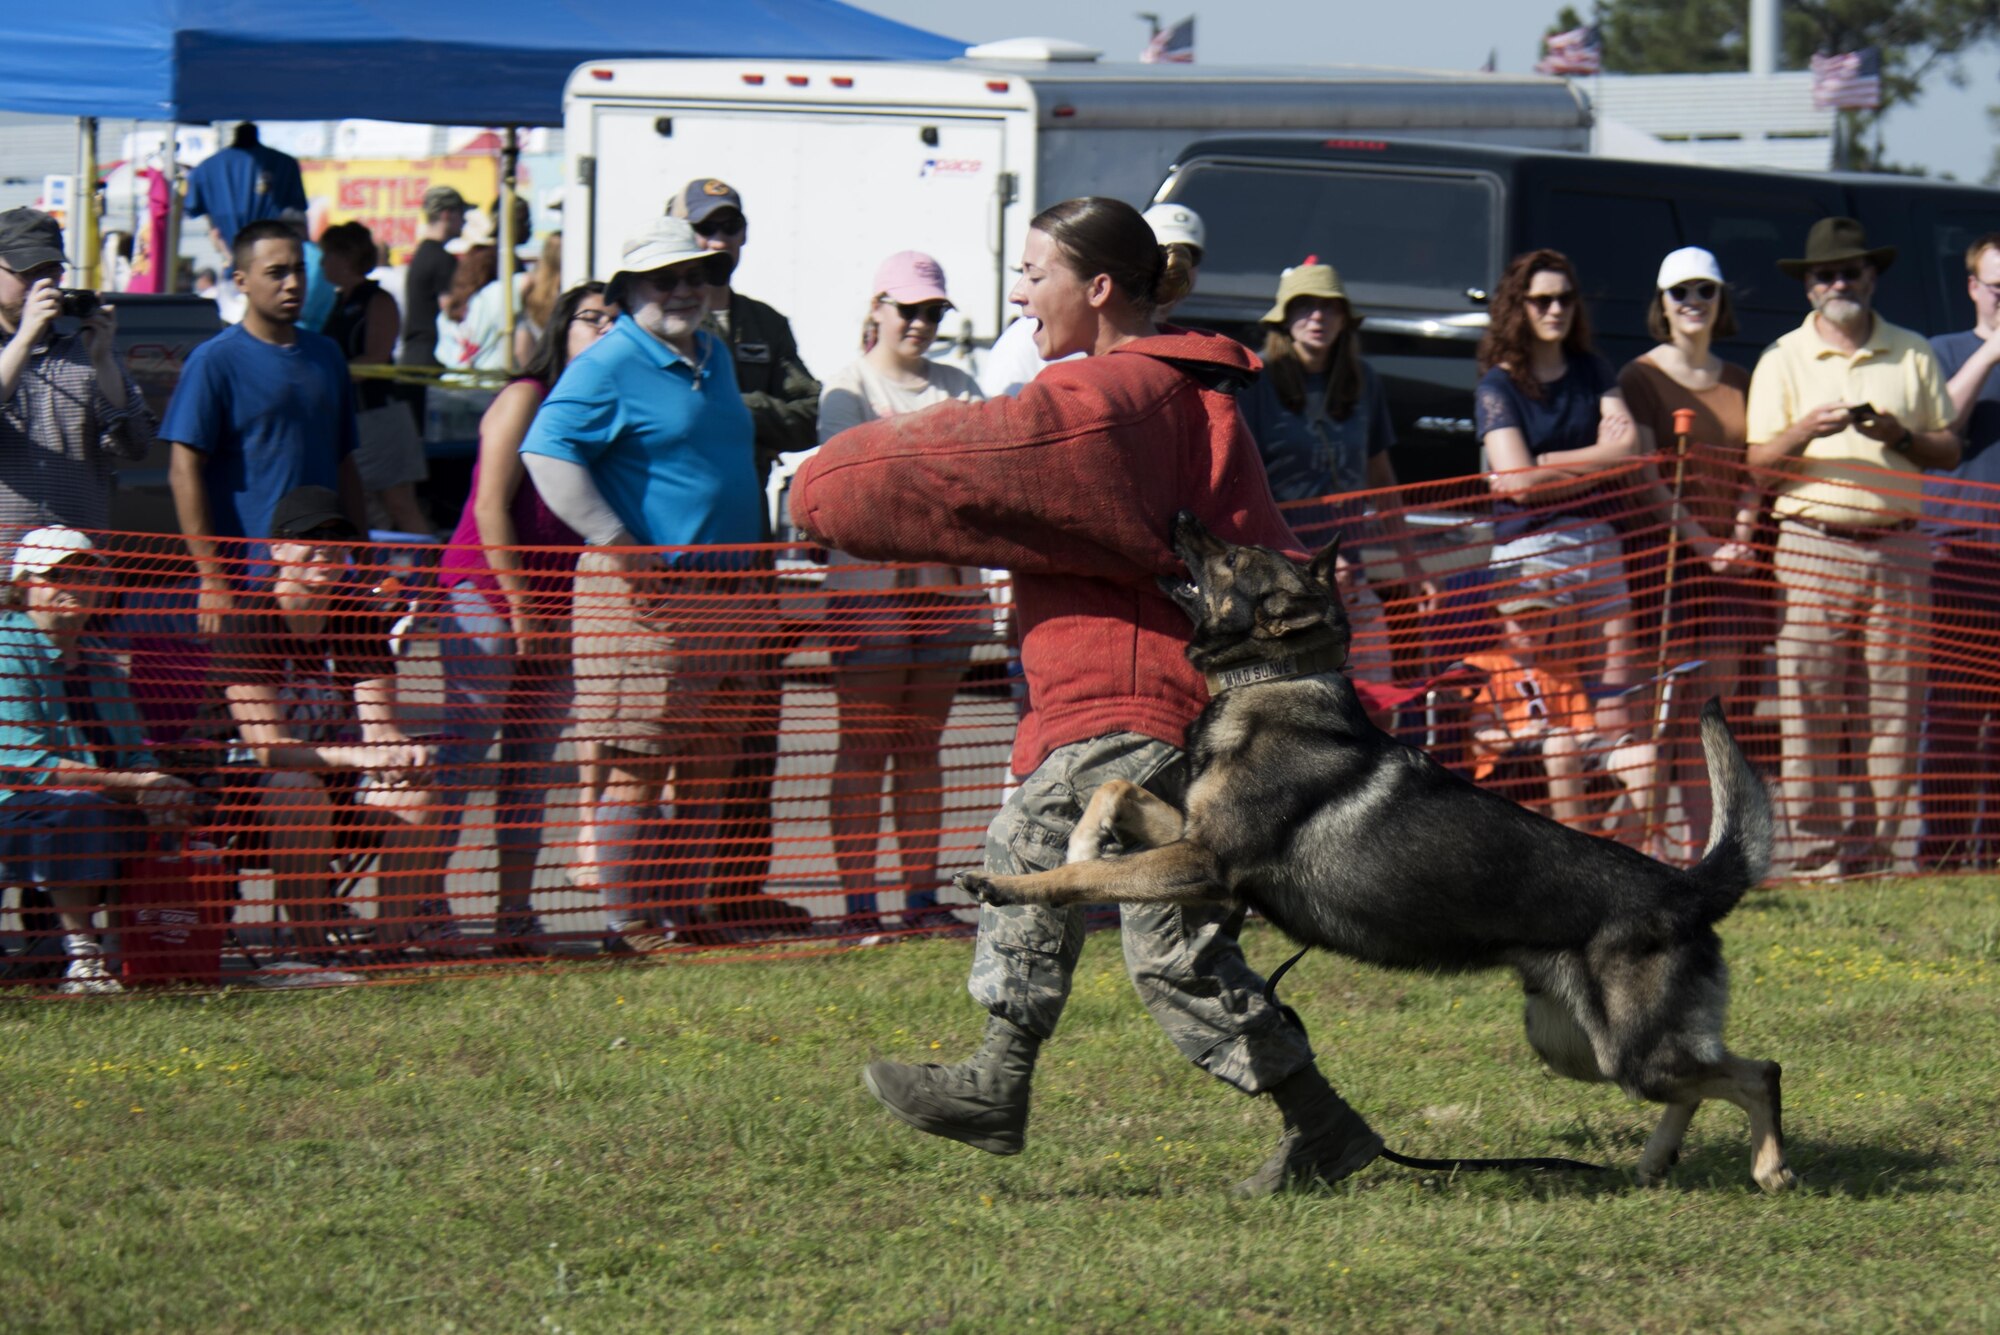 Spectators watch as Staff Sgt. Kathryn McCarthy, 20th Security Forces Squadron military working dog handler, and Miko Suave, 4th SFS MWD, demonstrates the MWD's focus and capabilities during the Wings Over Wayne Air Show, May 20, 2017, at Seymour Johnson Air Force Base, North Carolina. Working dogs are primarily trained for explosive detection, narcotics detection, search and rescue, guard duty and patrol. (U.S. Air Force photo by Airman Shawna L. Keyes)